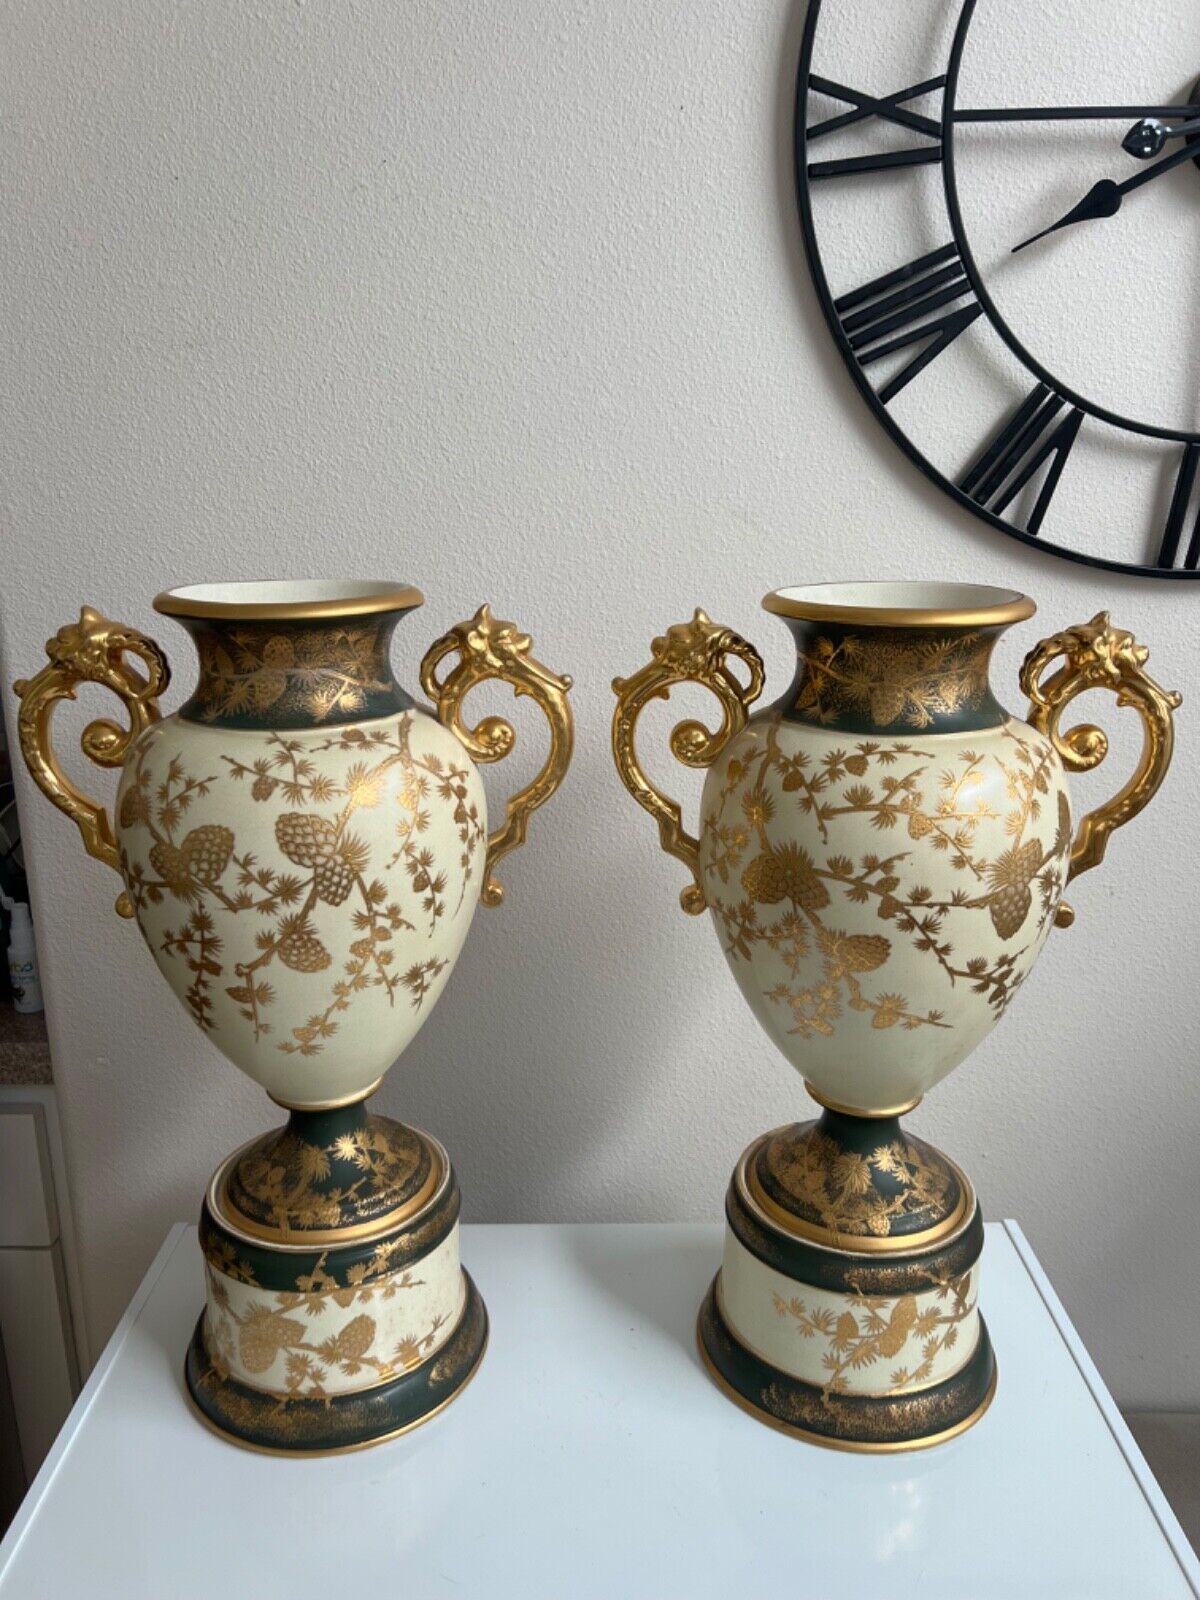 Large French Pair of Porcelain Antique Vases with gold color accents